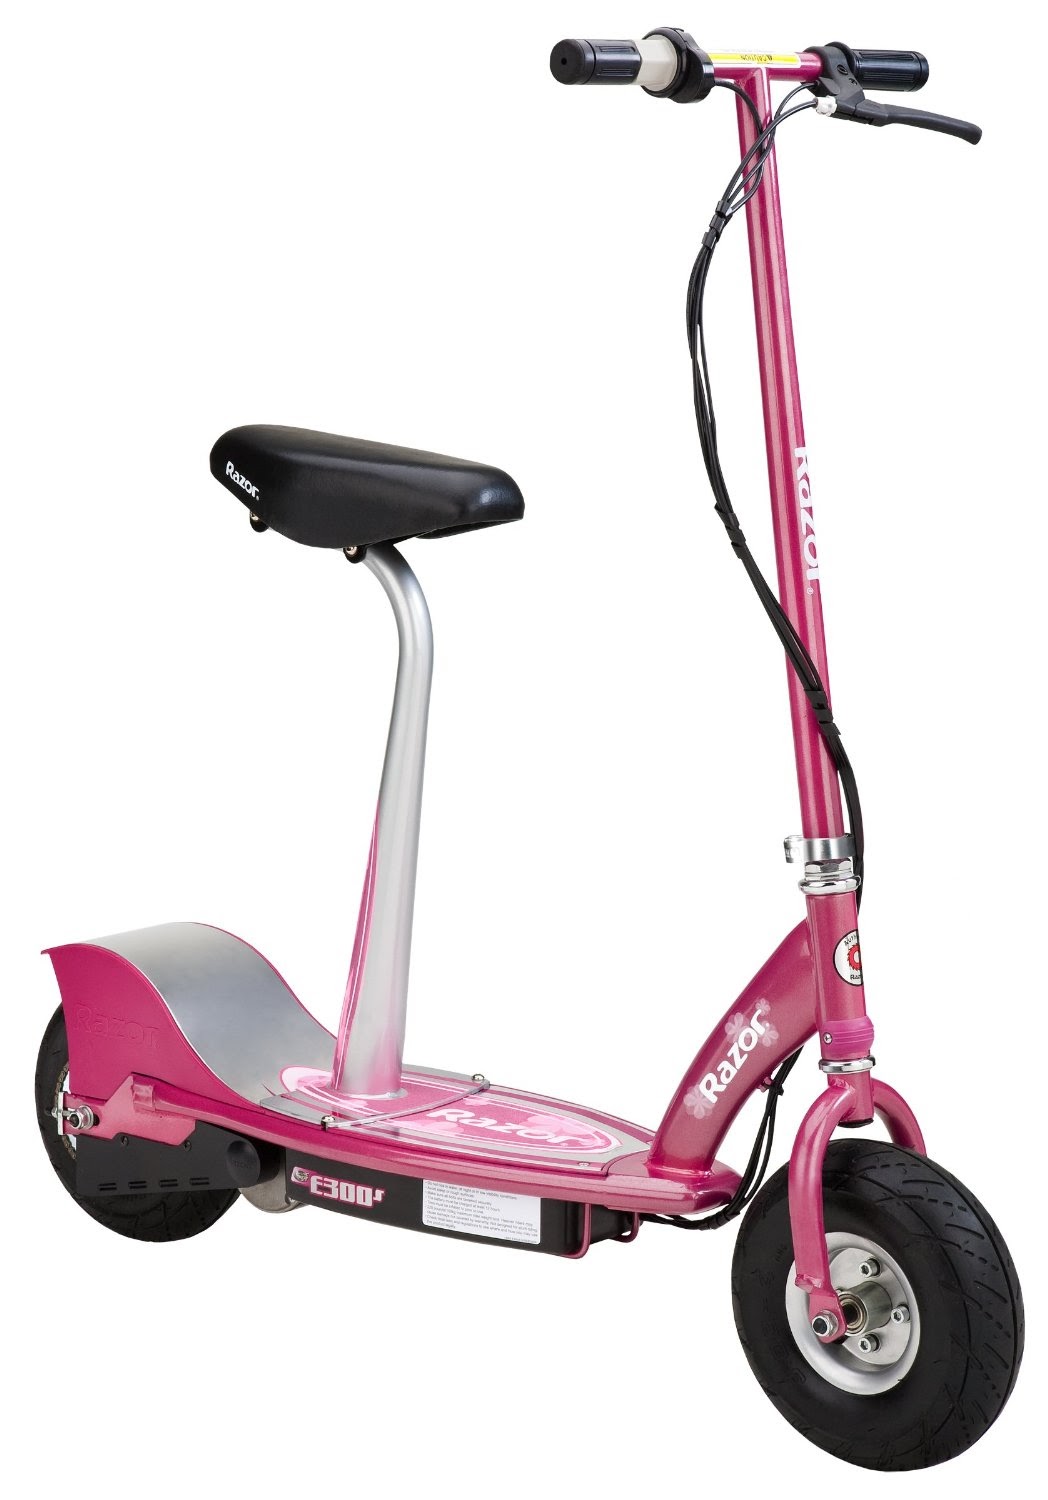 Exercise Bike Zone Razor E300s Seated Electric Scooter Review Free